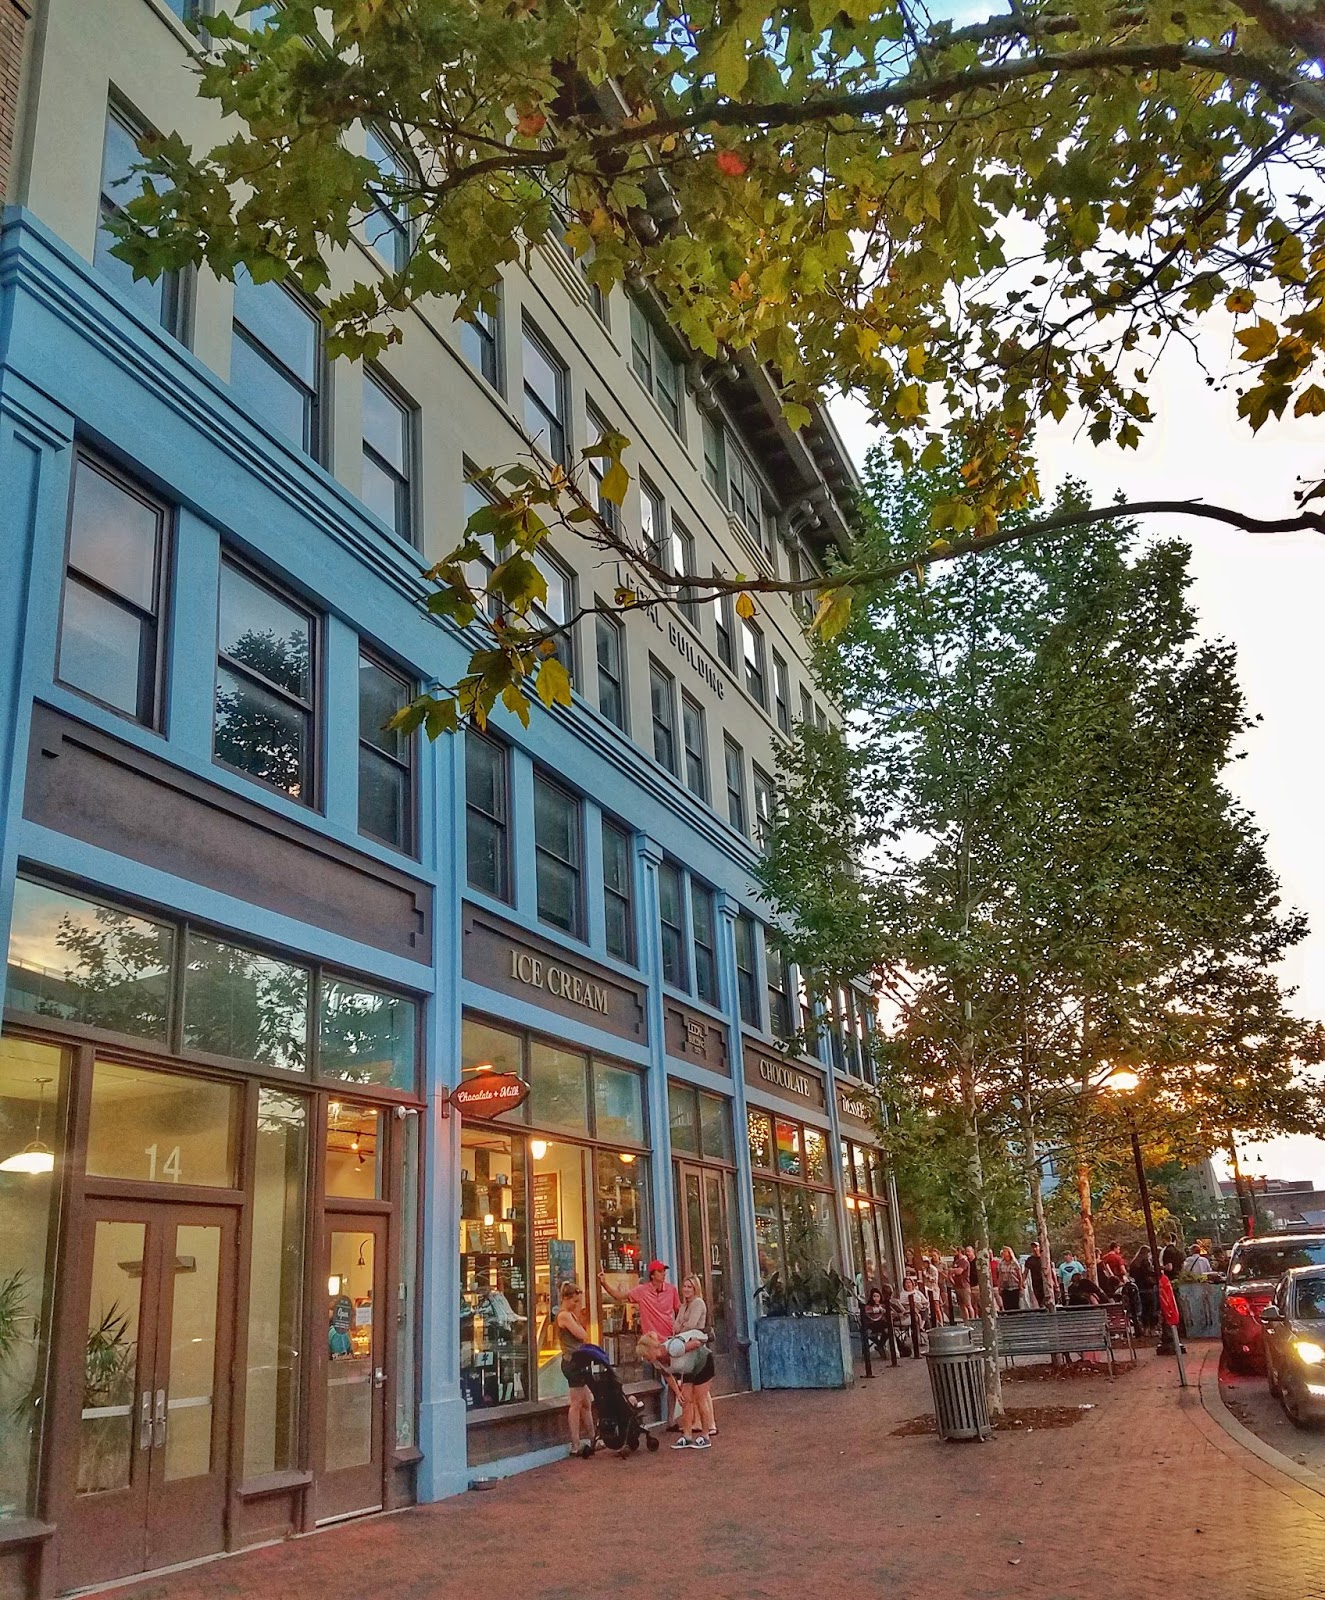 NC Travel: 5 Reasons Why You Should Vacation in Downtown Asheville